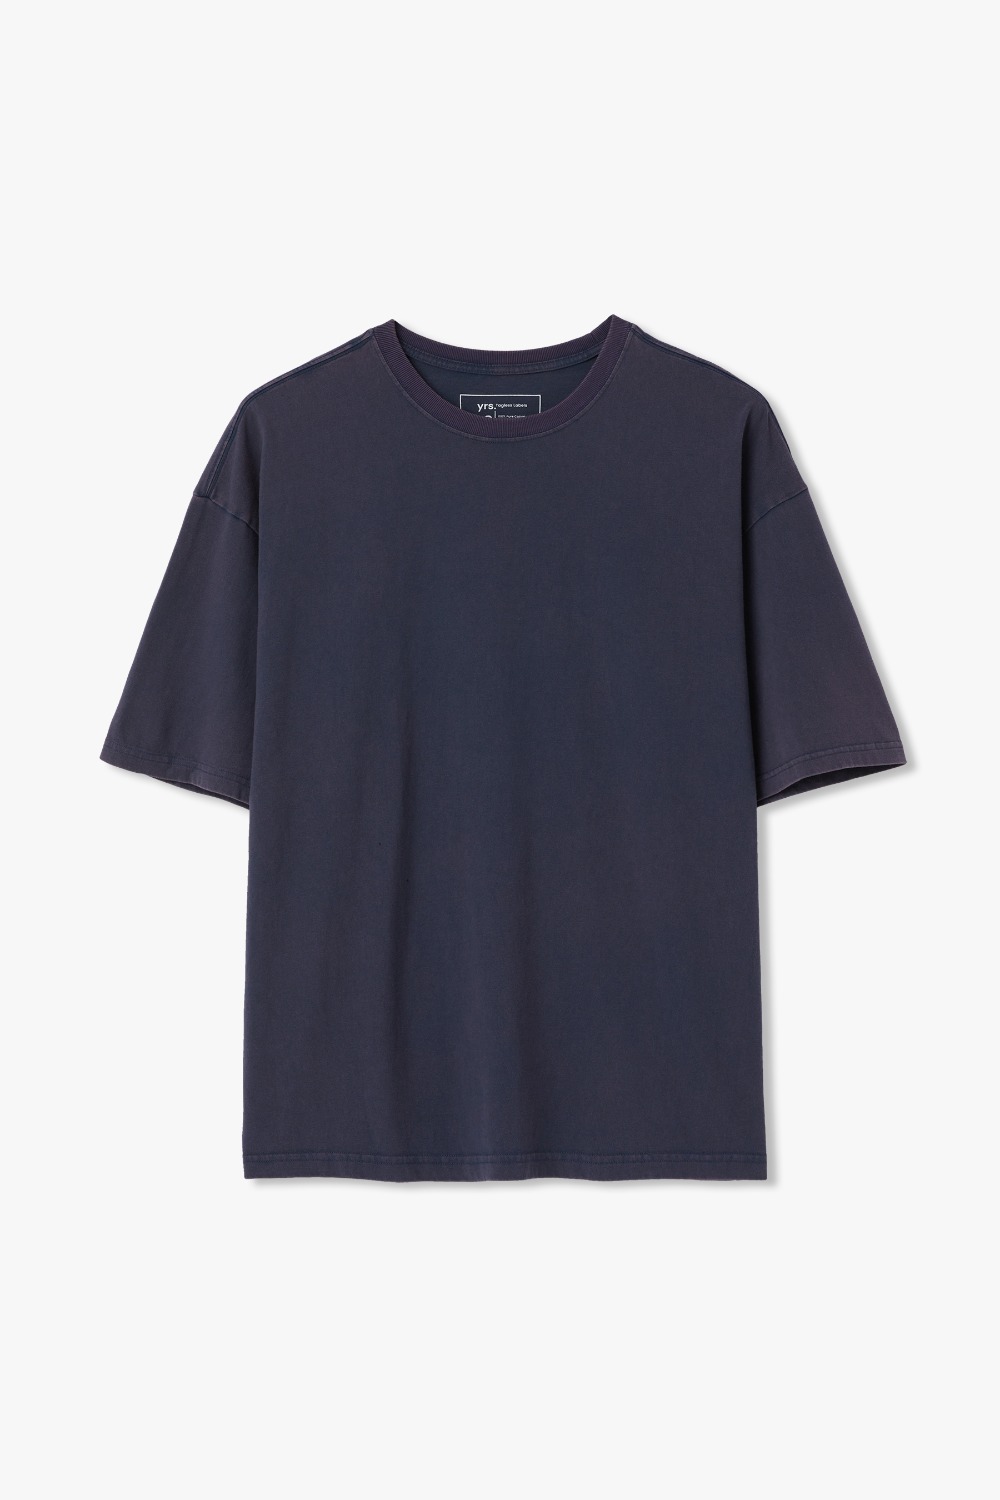 DUSTY NAVY YRS WASHED COTTON KUVAIKA T (INNER TYPE, ECP GARMENT PROCESS)